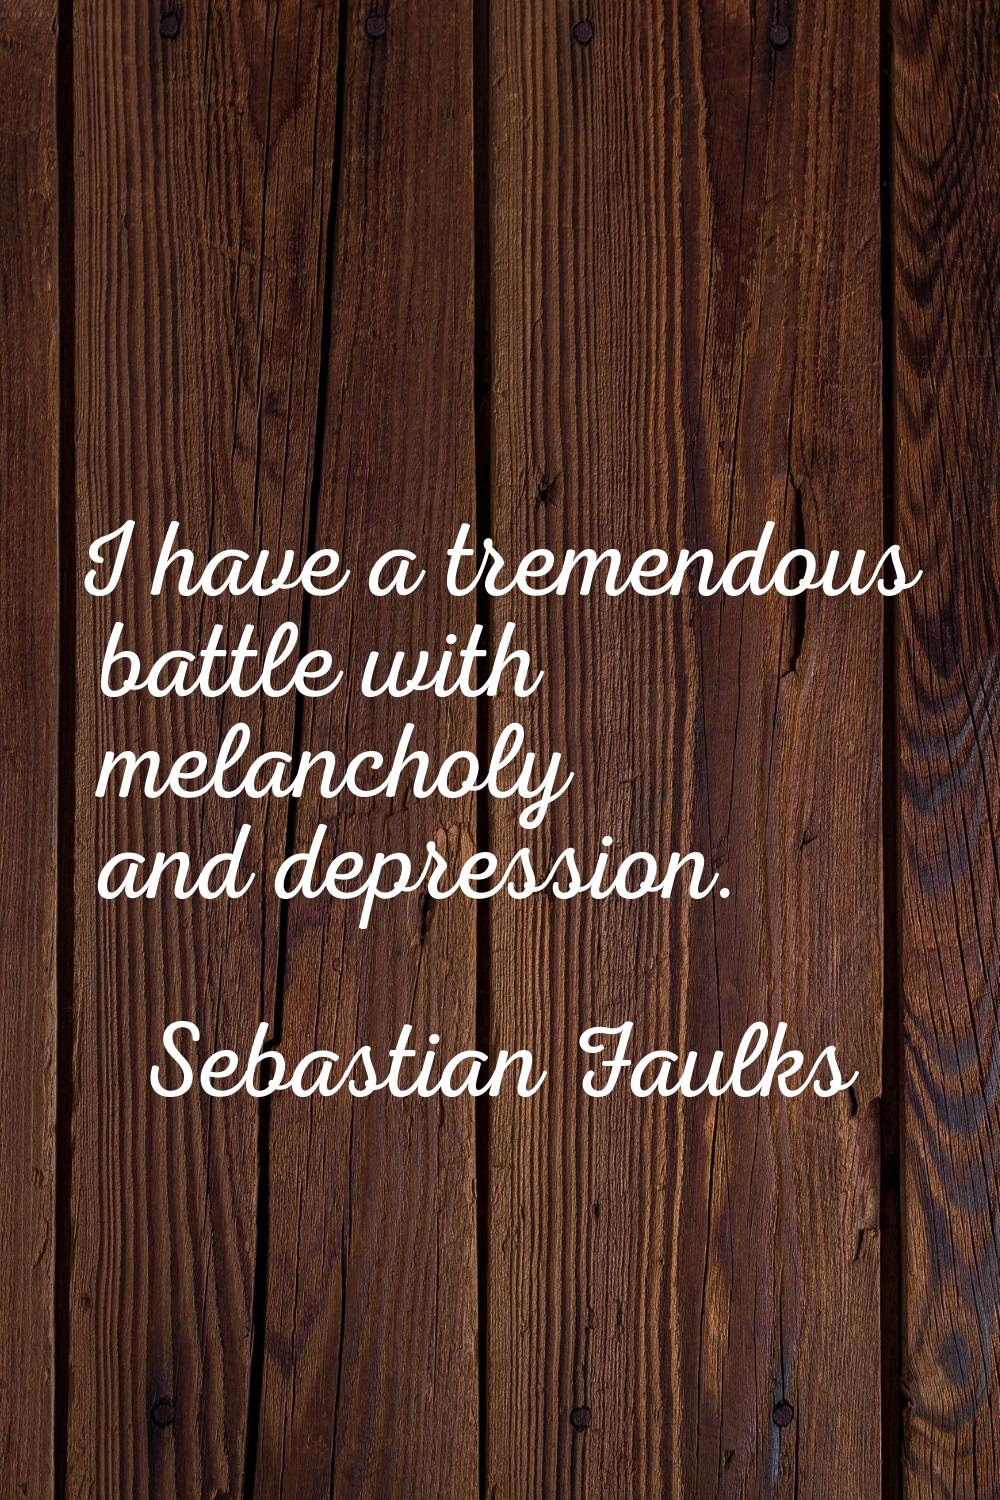 I have a tremendous battle with melancholy and depression.